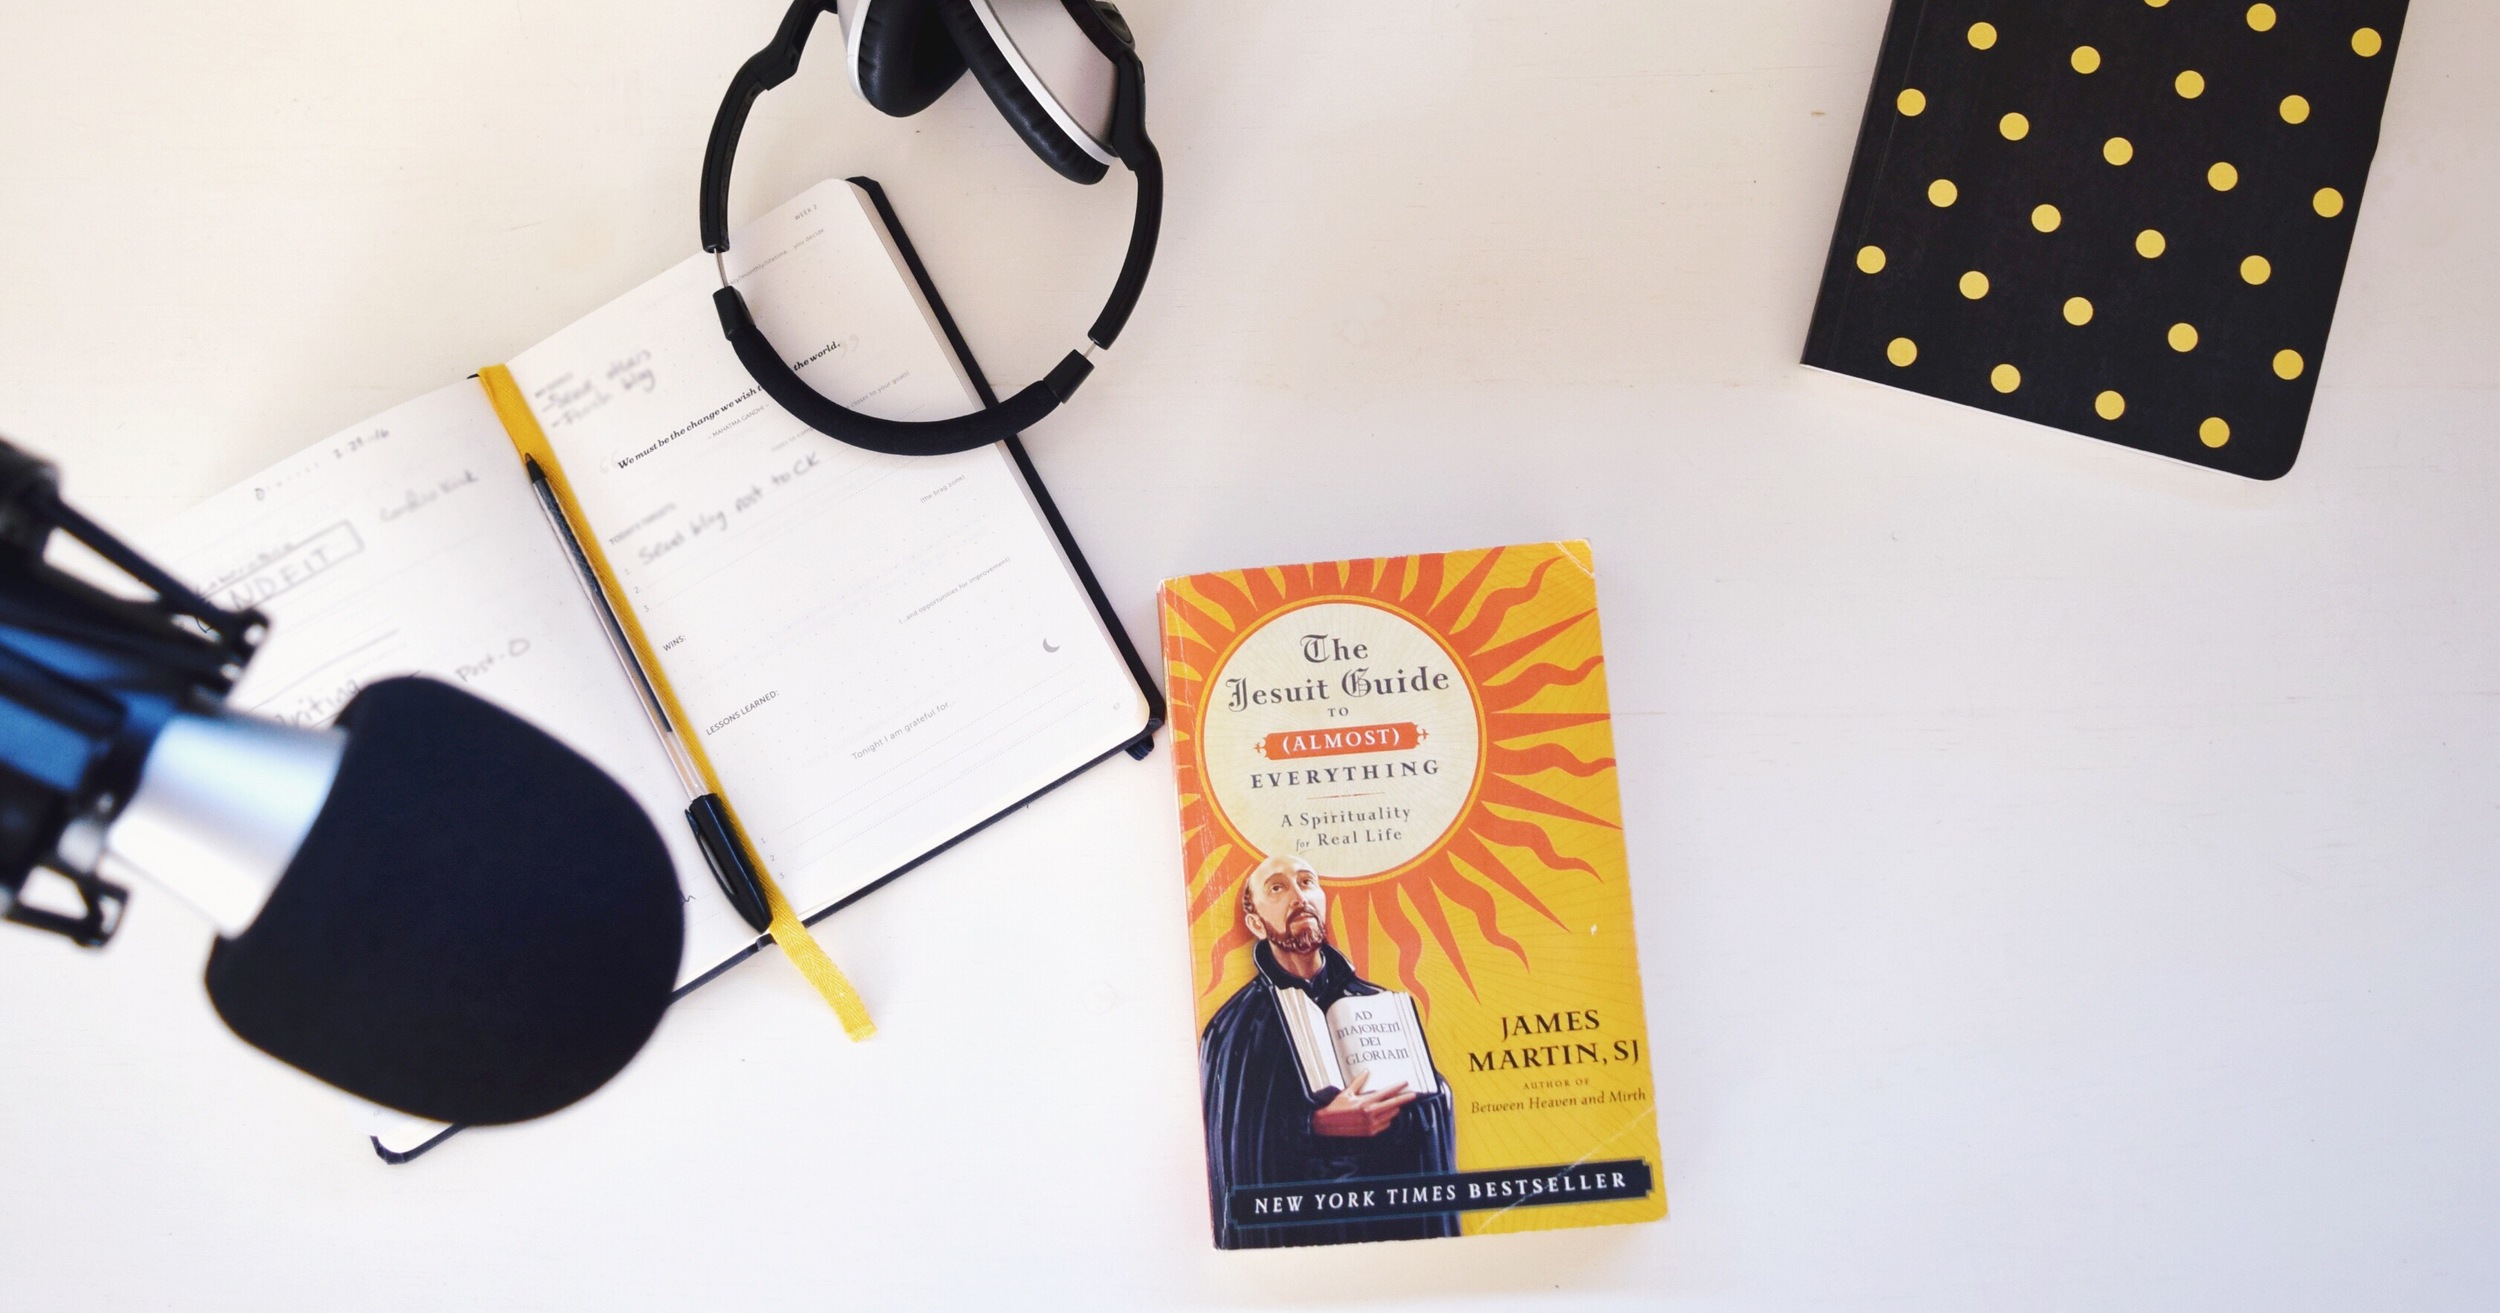 Do the Jesuits have all the answers? (& mapping mindfulness to faith) — a book review